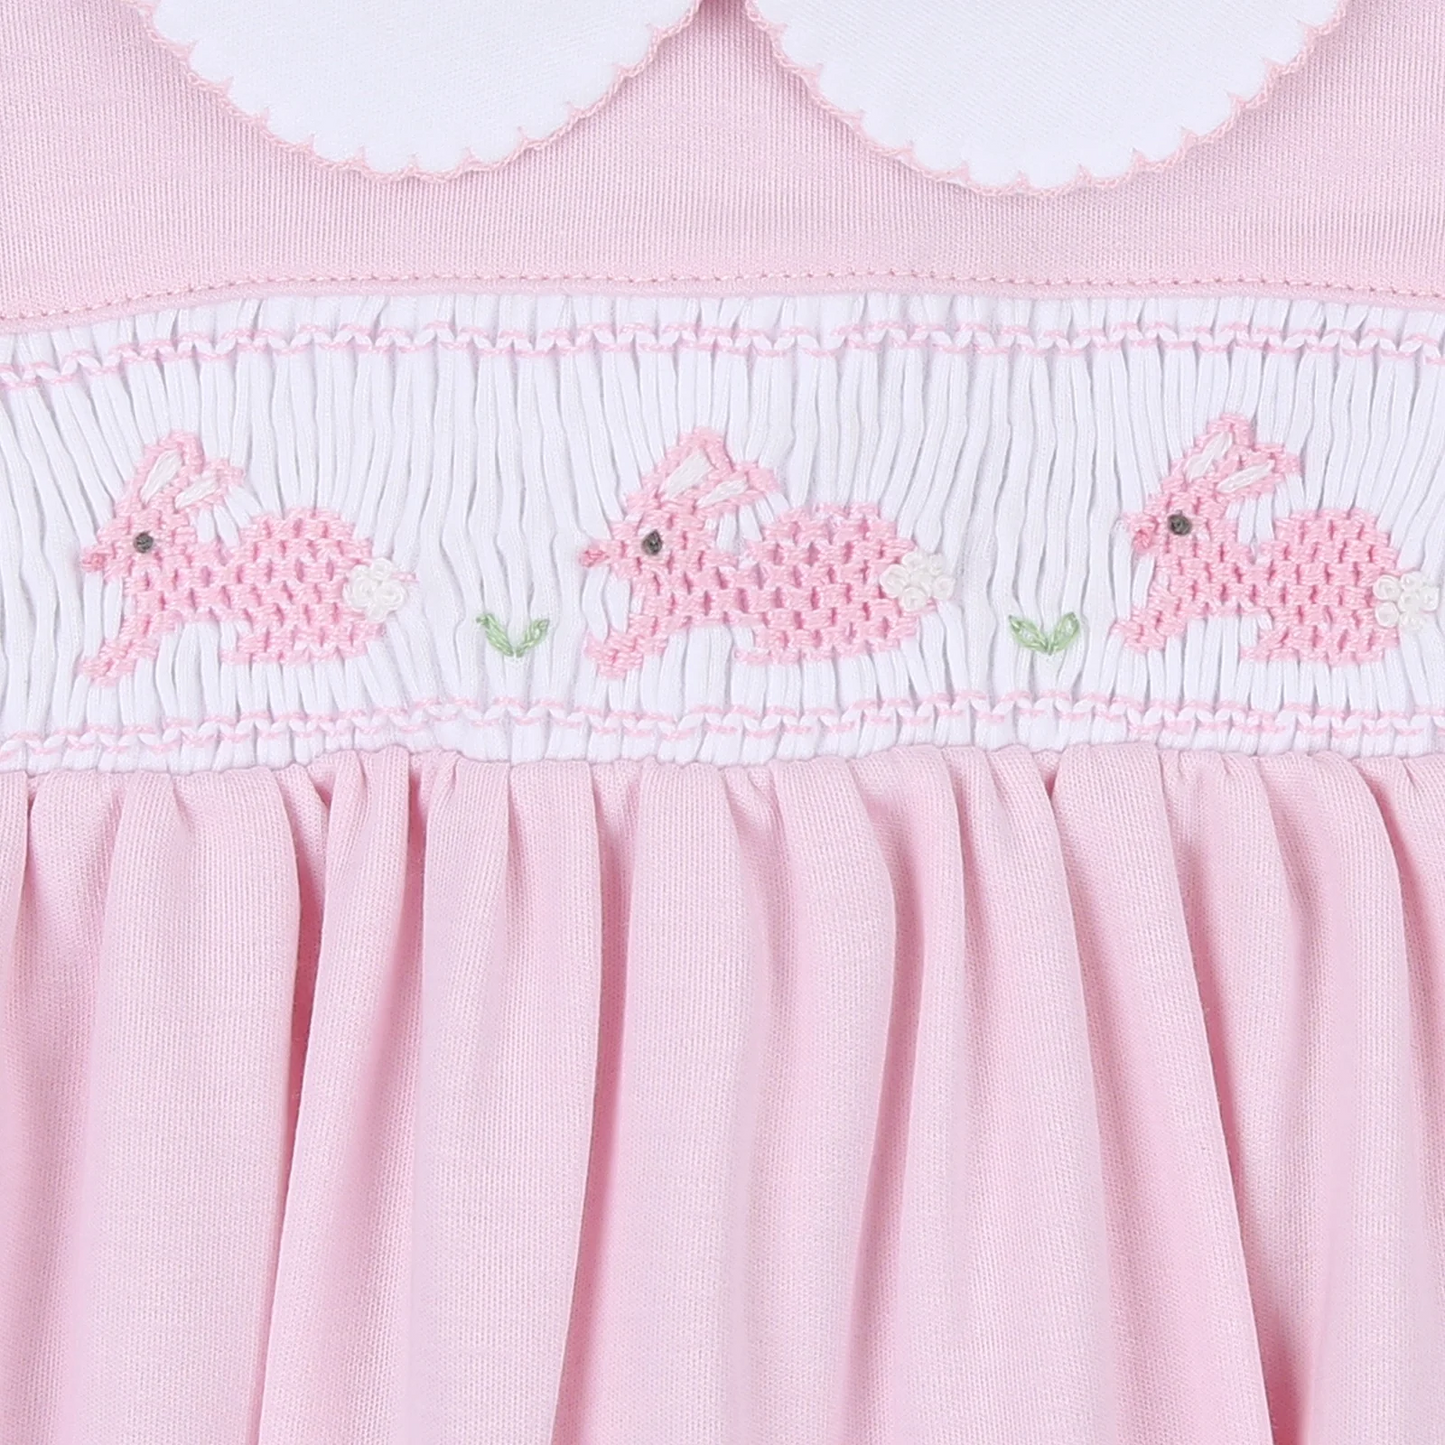 Pastel Bunny Smocked Flutters Bubble